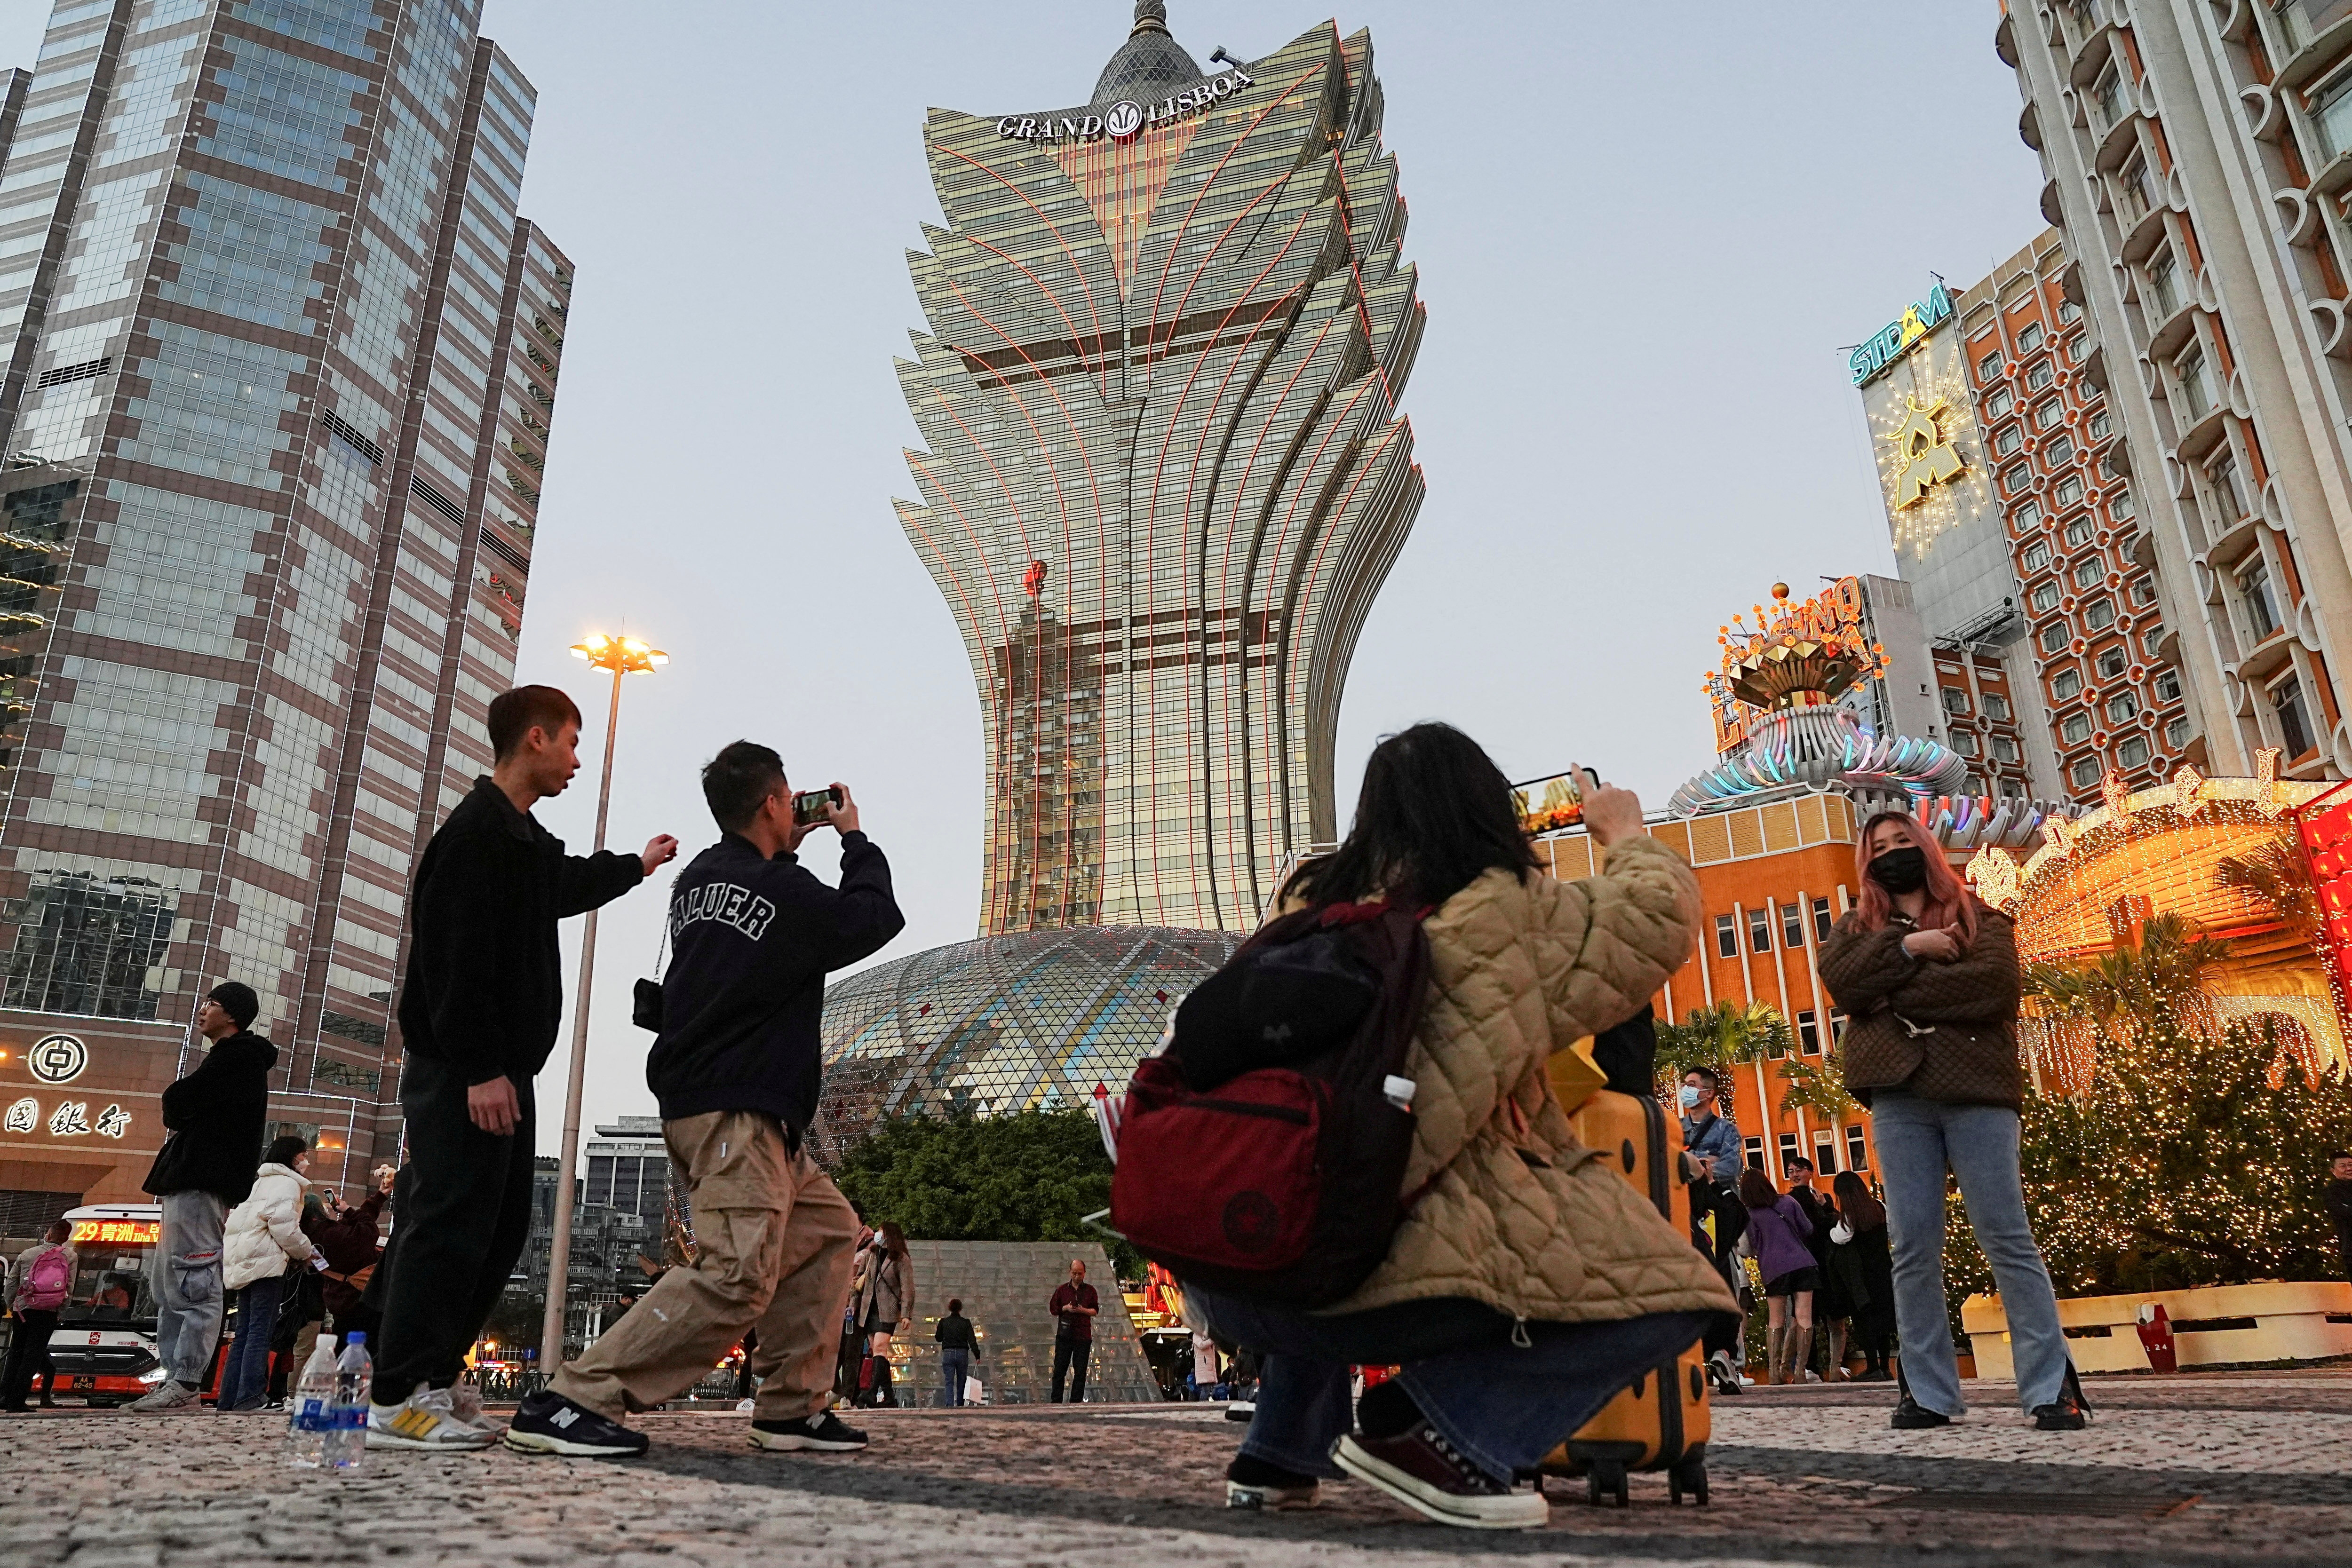 Visitors pose for photos outside the Grand Lisboa casino operated by SJM Holdings during Lunar New Year in Macau, China, on Jan 24, 2023. (Reuters)